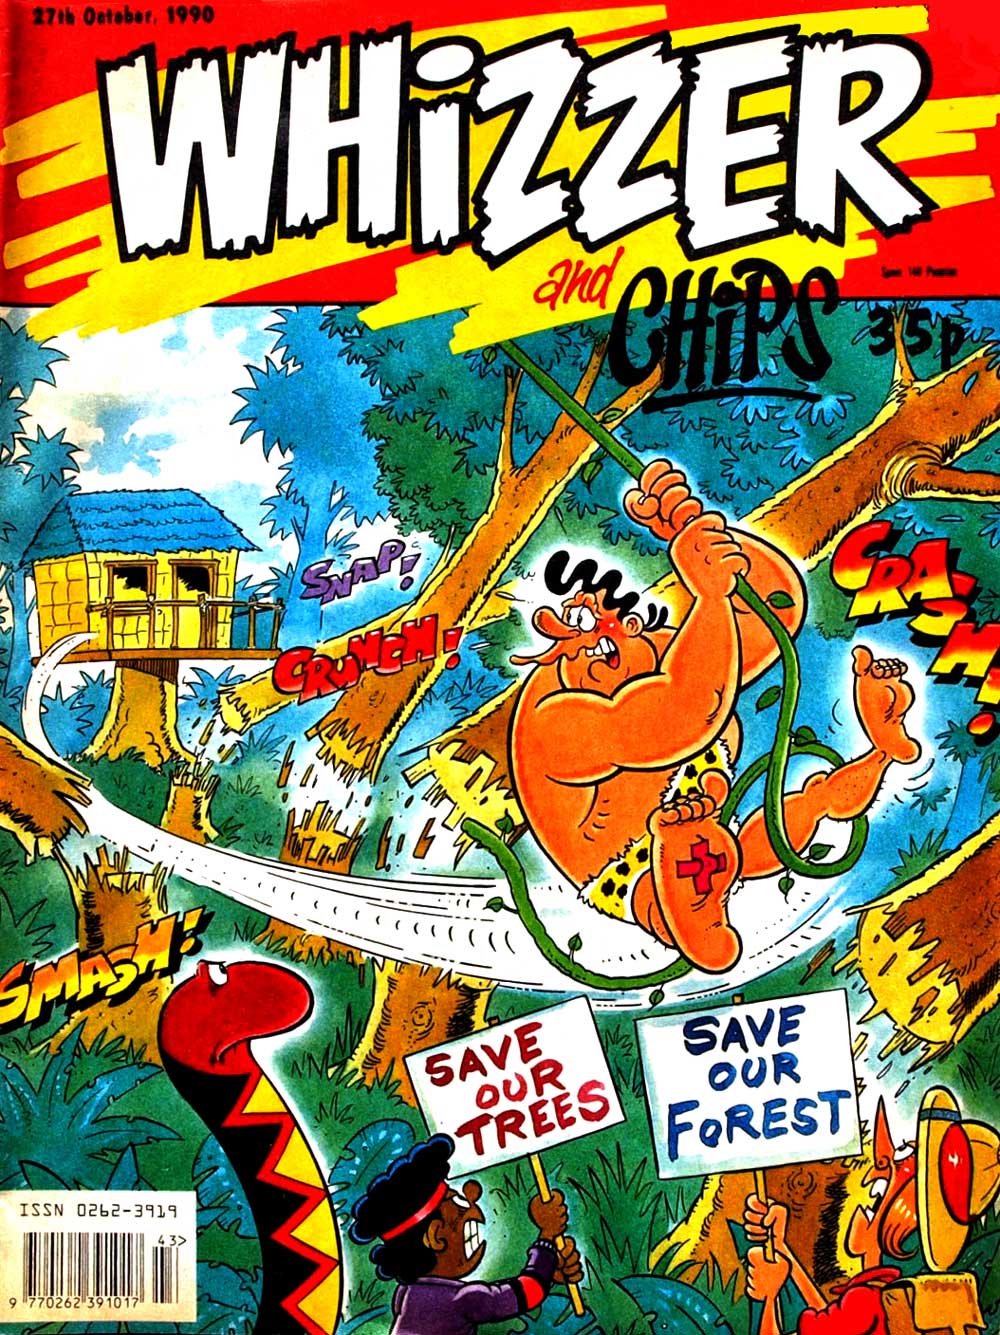 Jimmy Hansen’s cover for the last issue of Whizzer and Chips, published in October 1990